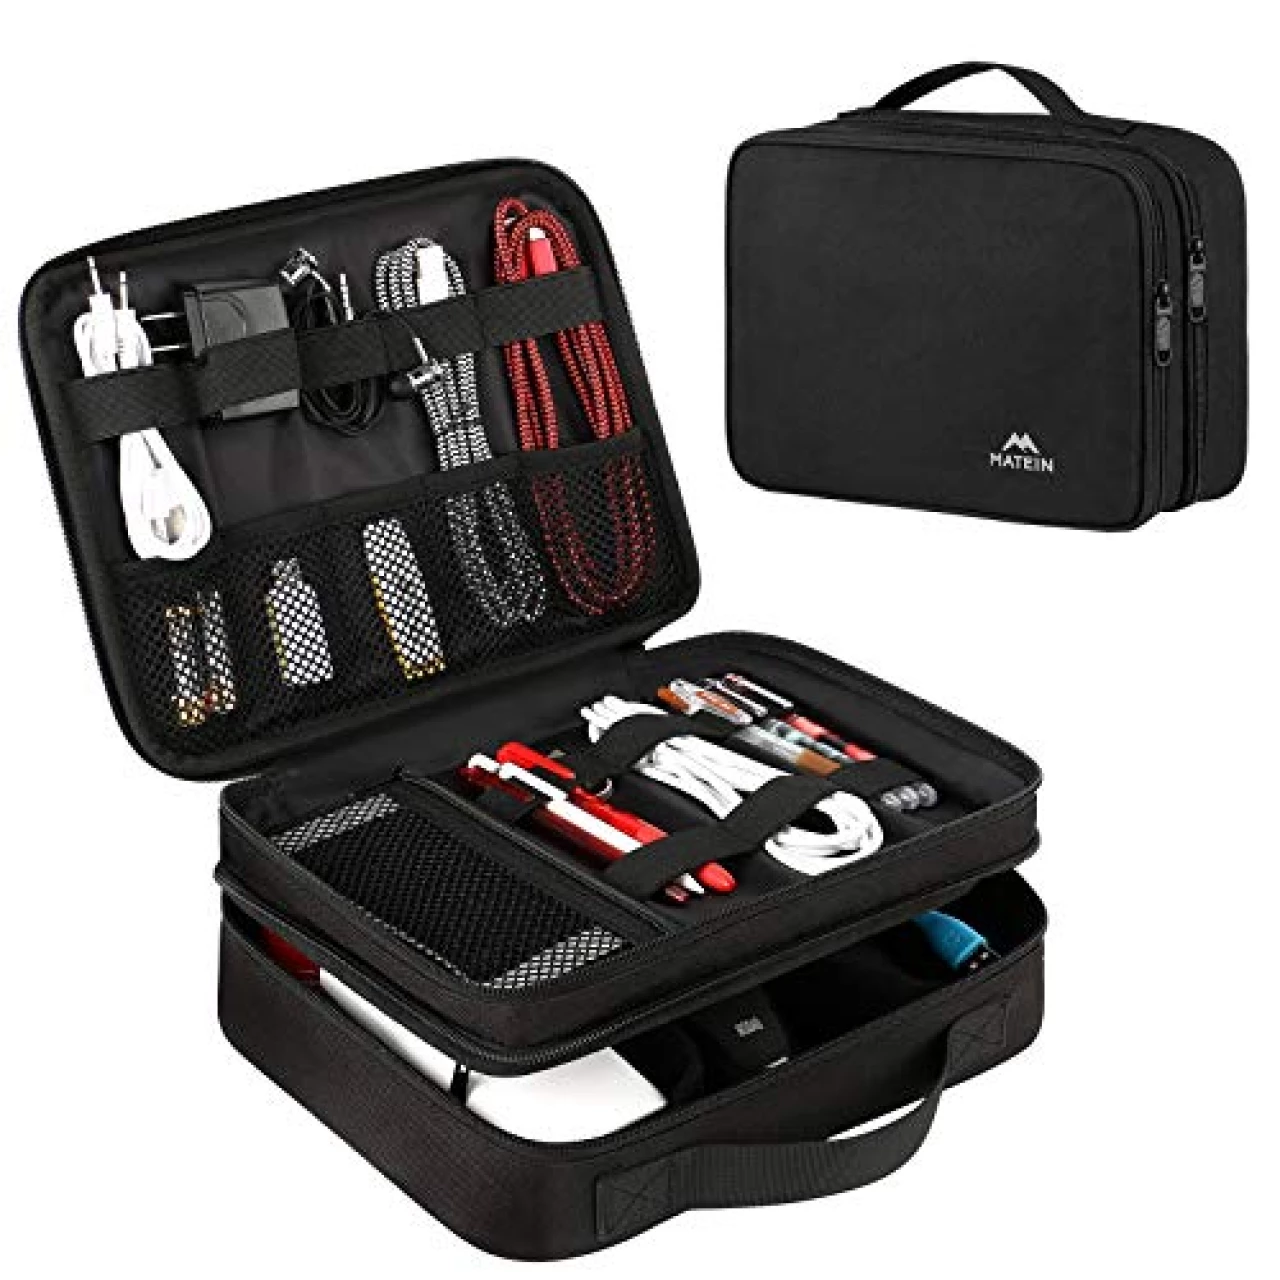 MATEIN Electronics Organizer Travel Case, Water Resistant Cable Organizer Bag